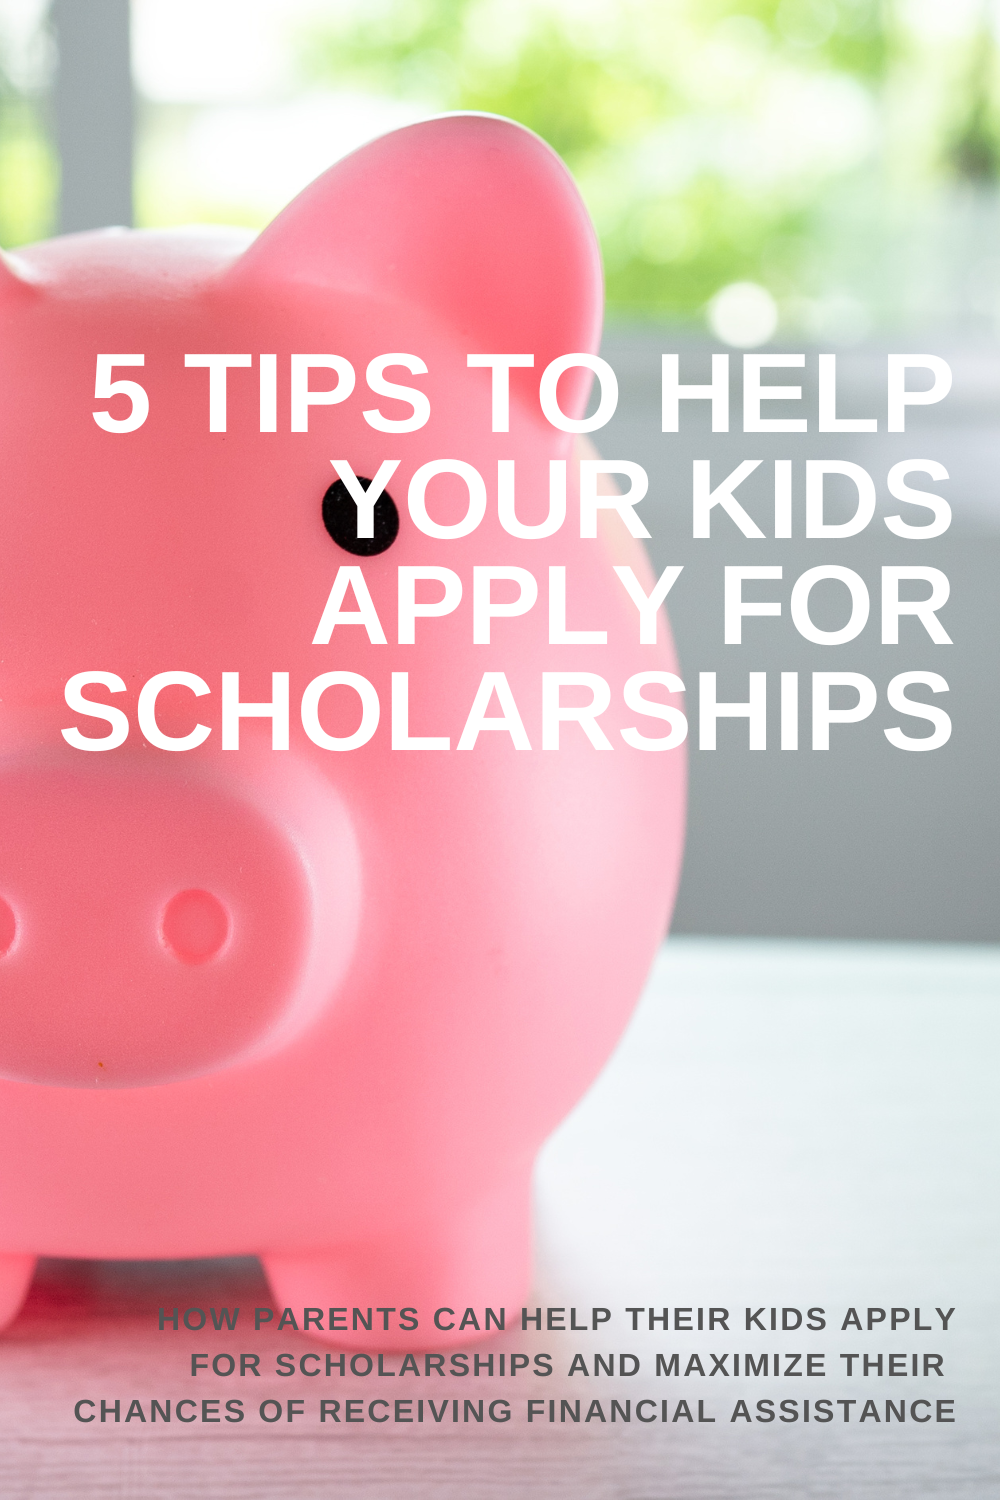 5 Tips To Help Your Kids Apply For Scholarships